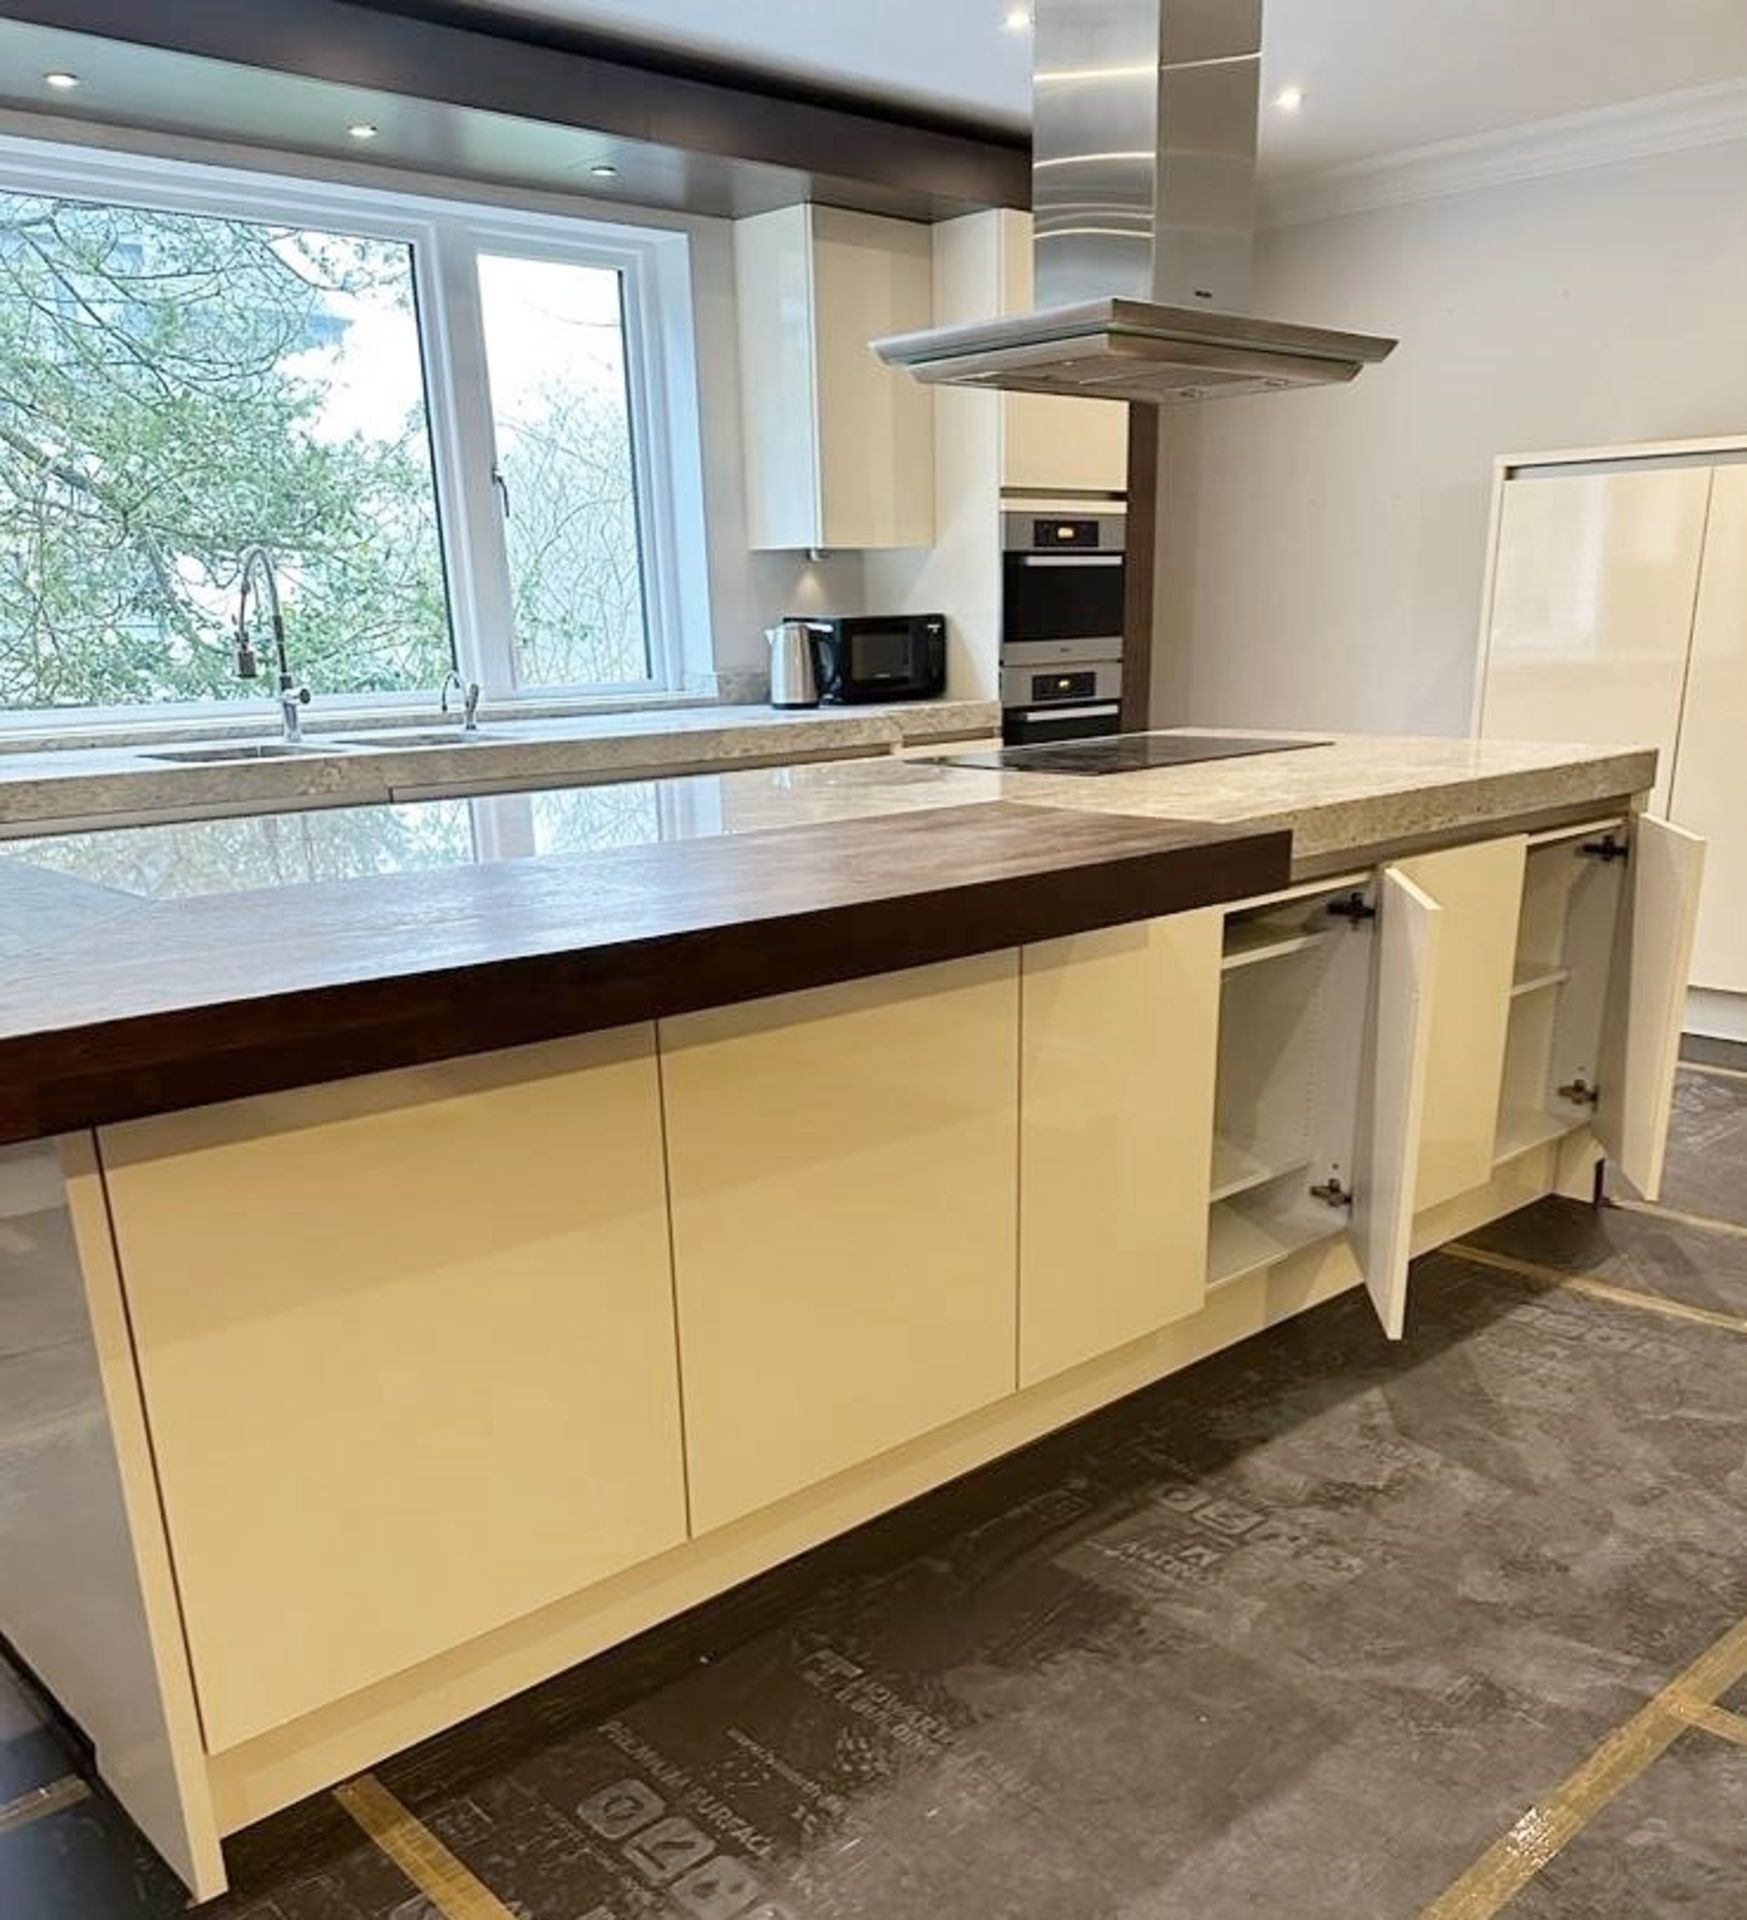 1 x Stunning SIEMATIC Luxury Fitted Handleless Kitchen With Marble Worktops - Original Cost £60,000 - Image 33 of 51